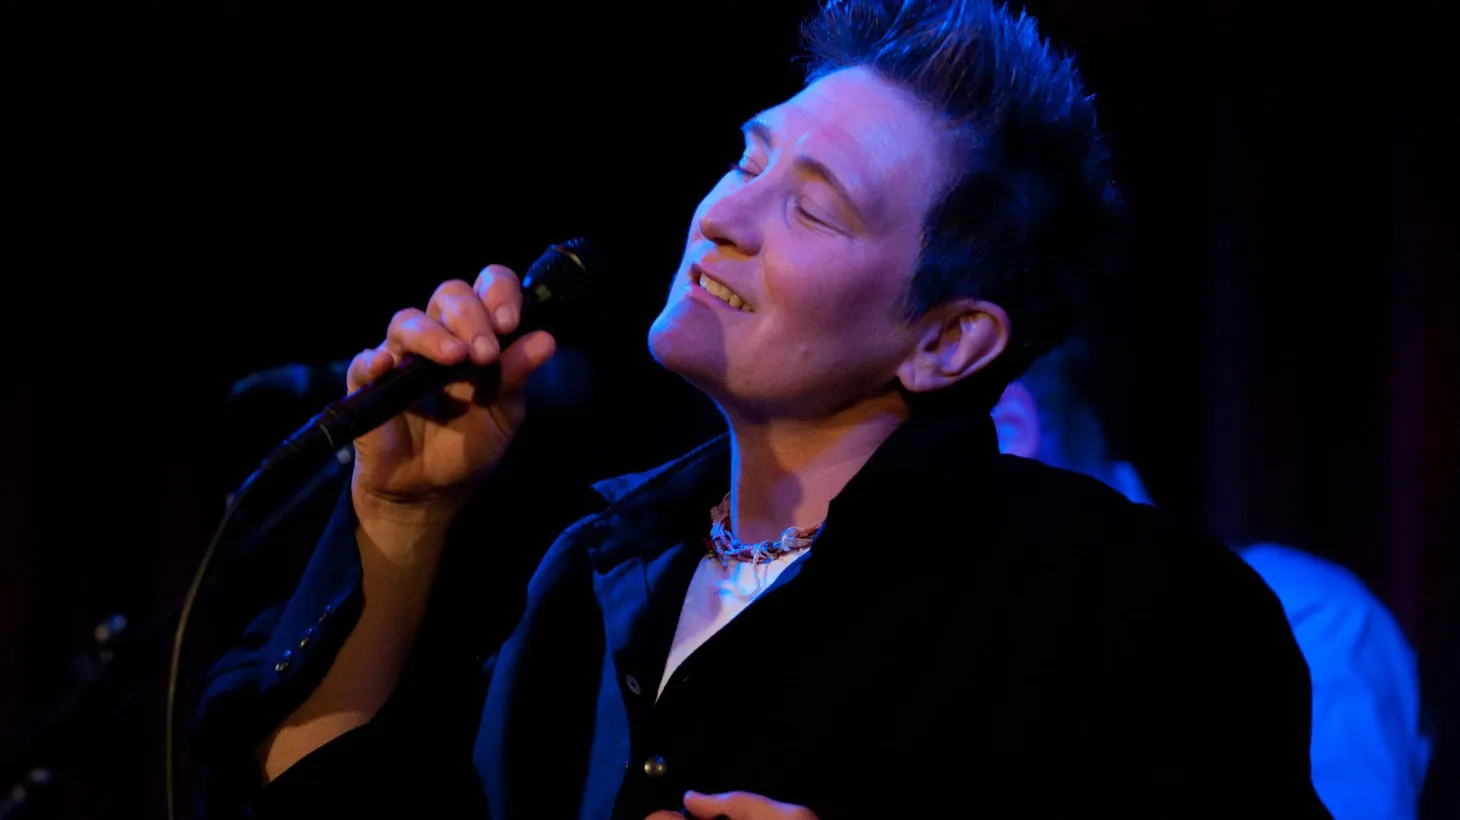 Canadian chanteuse k.d. lang and her band showcase songs from the record Sing it Loud at Apogee Studio.